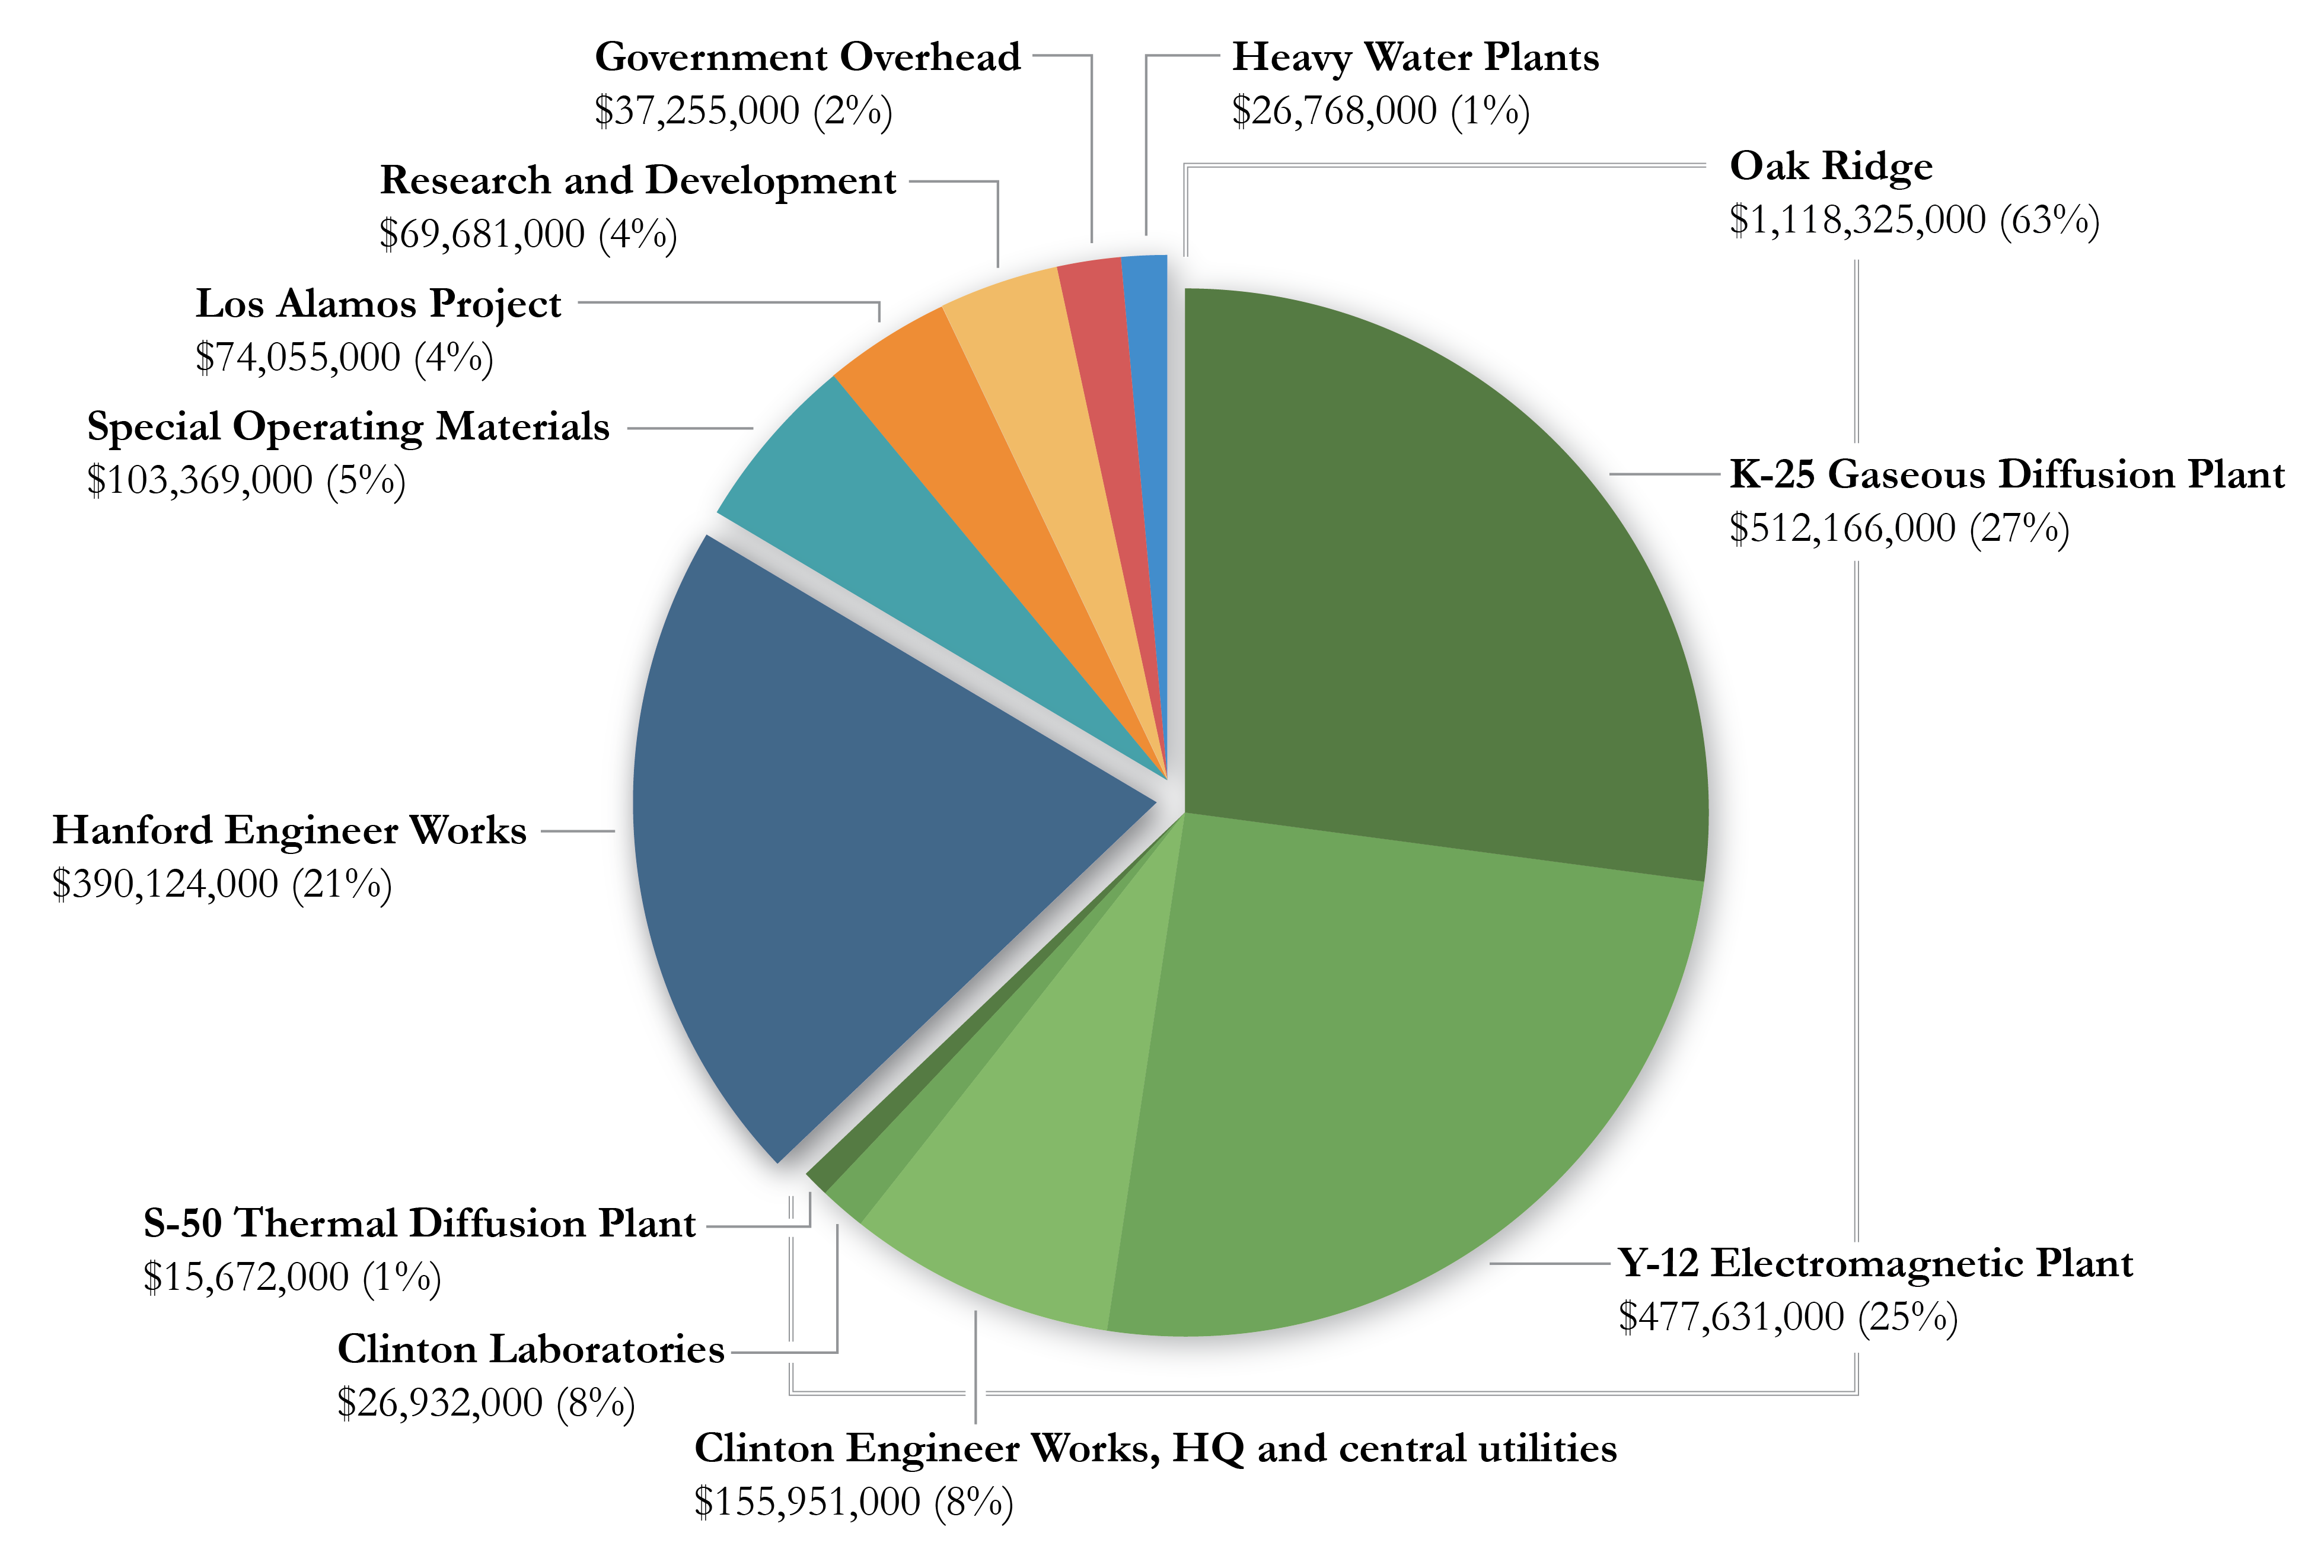 This pie chart shows the various costs of the parts of the Manhattan Project, with the largest share taken up by Oak Ridge and Hanford Engineer Works. Los Alamos itself only accounted for about four percent of the overall cost. 